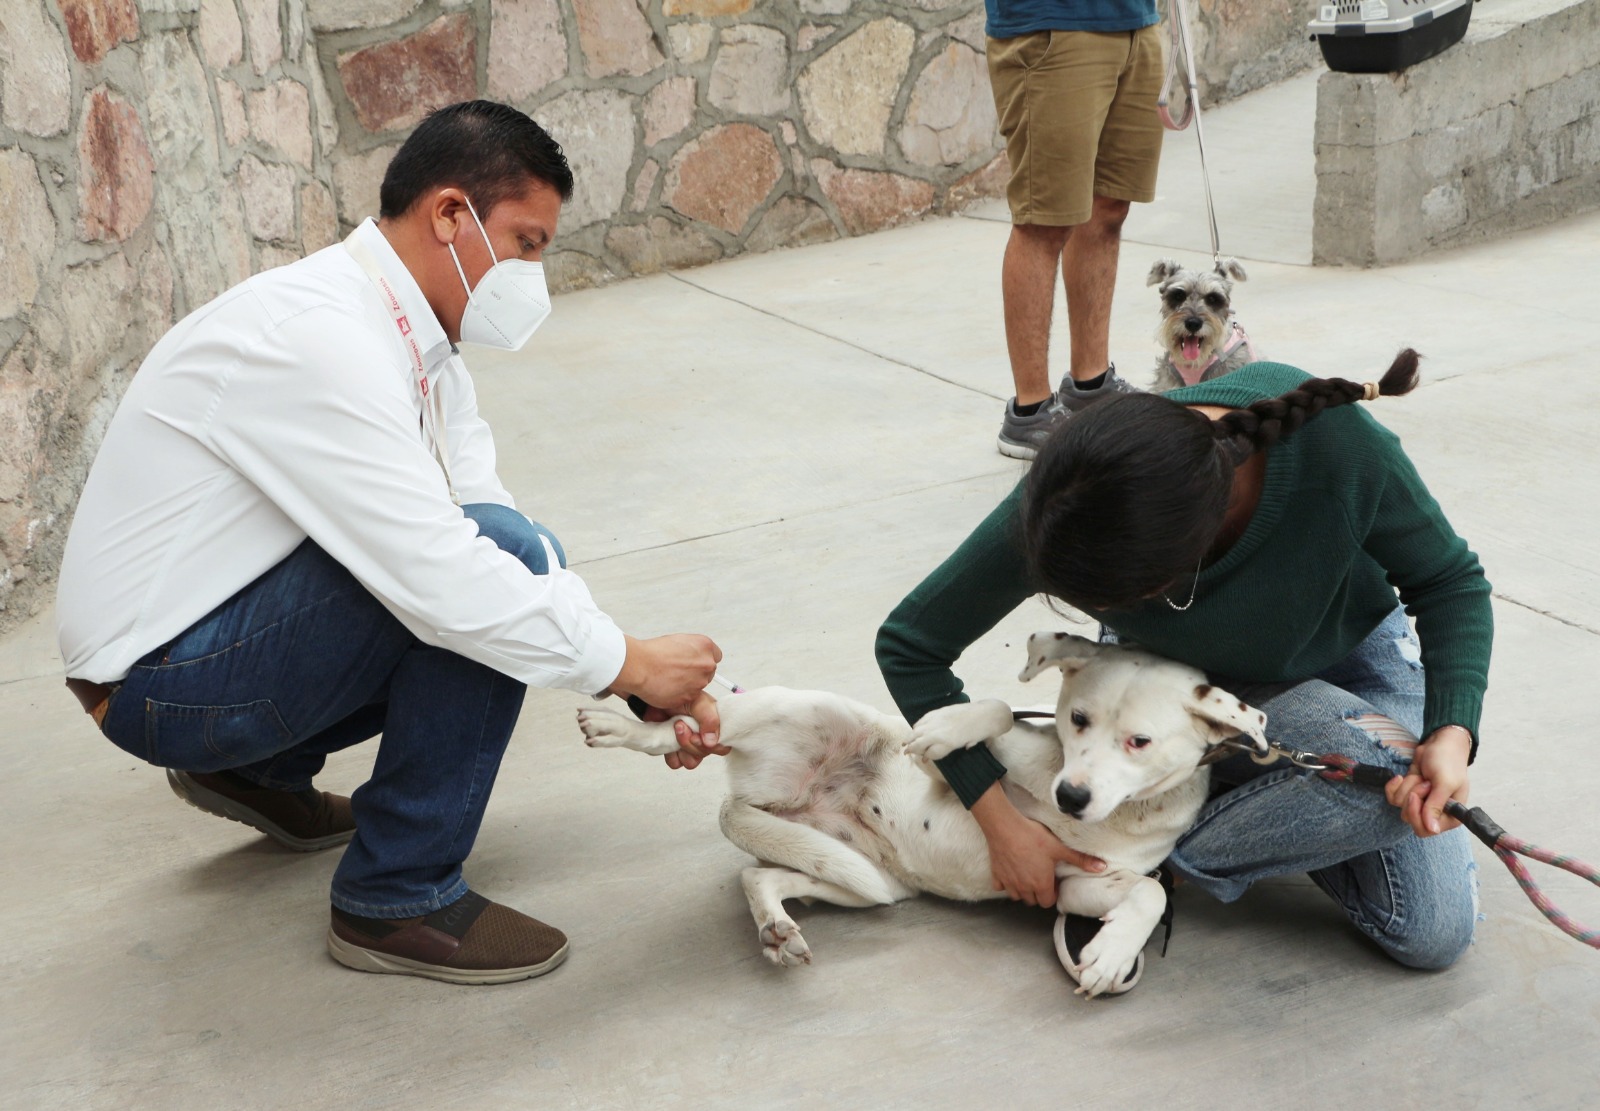 Title: “Zacatecas: A Rabies-Free Entity | Importance of Vaccination and Disease Prevention”